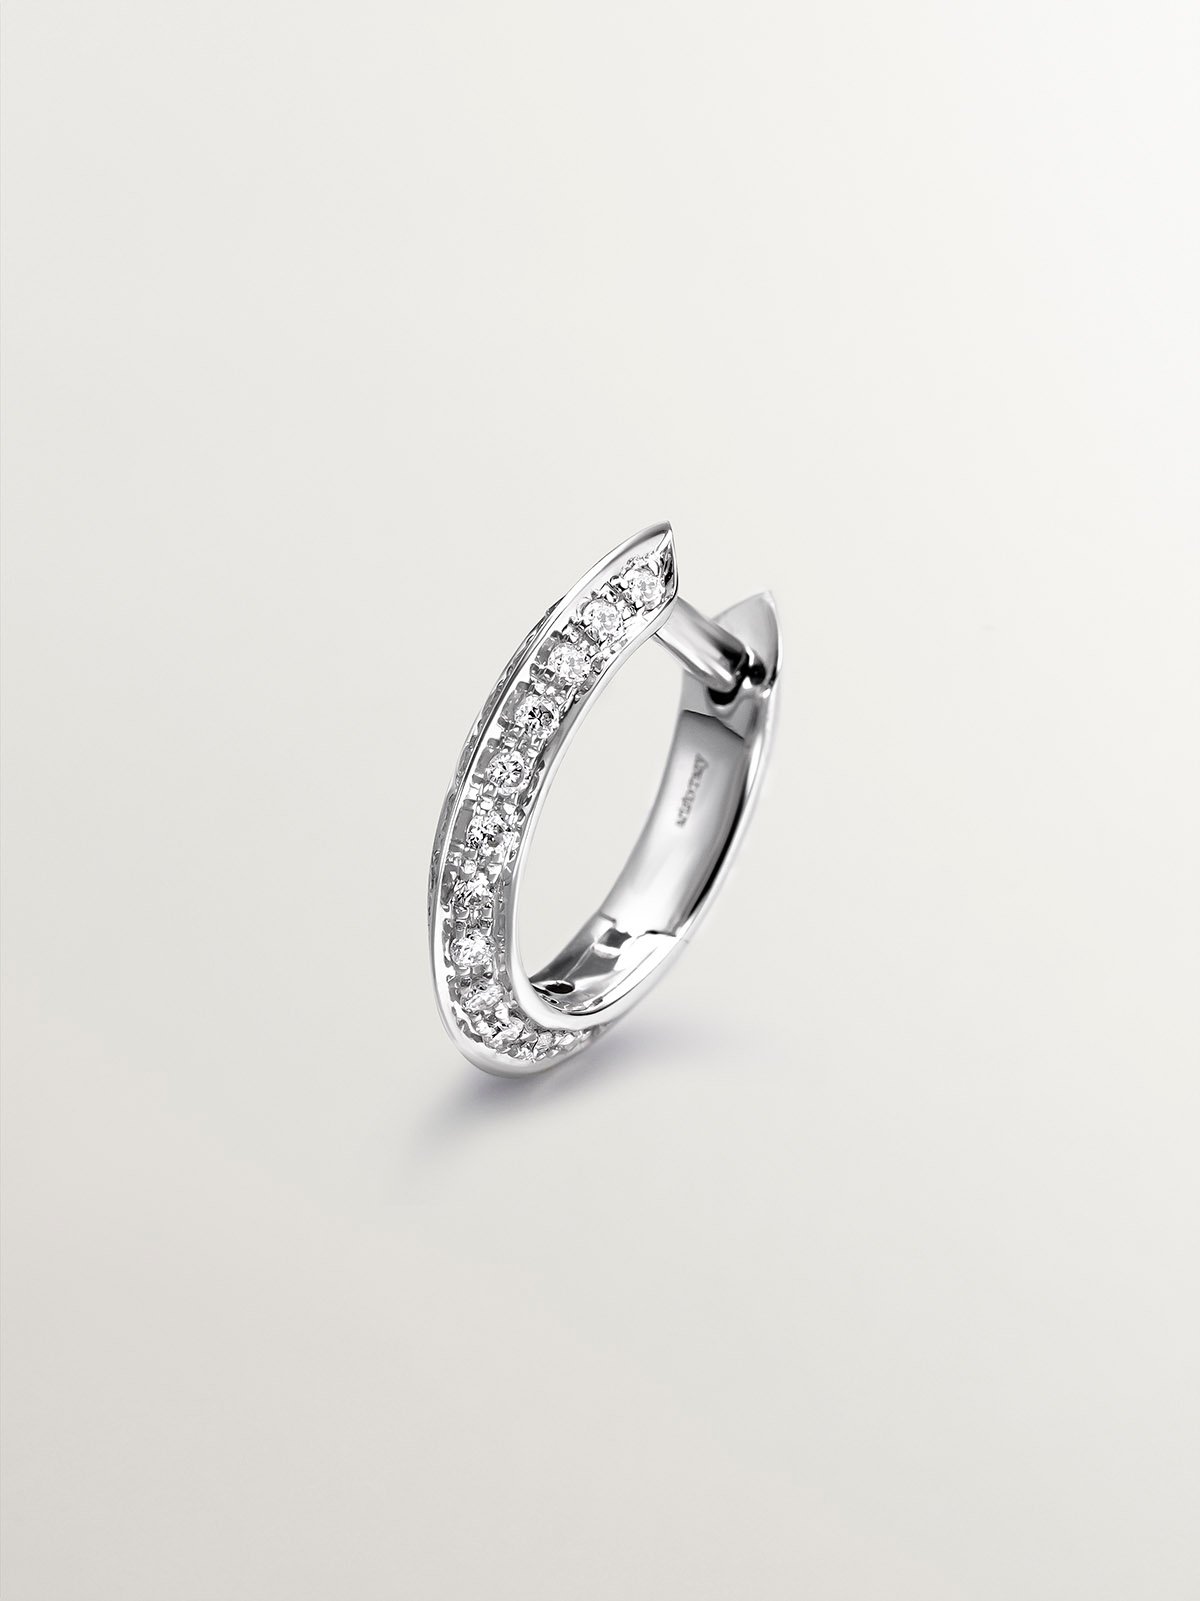 Individual small hoop earring in 18K white gold with 0.07cts diamonds.